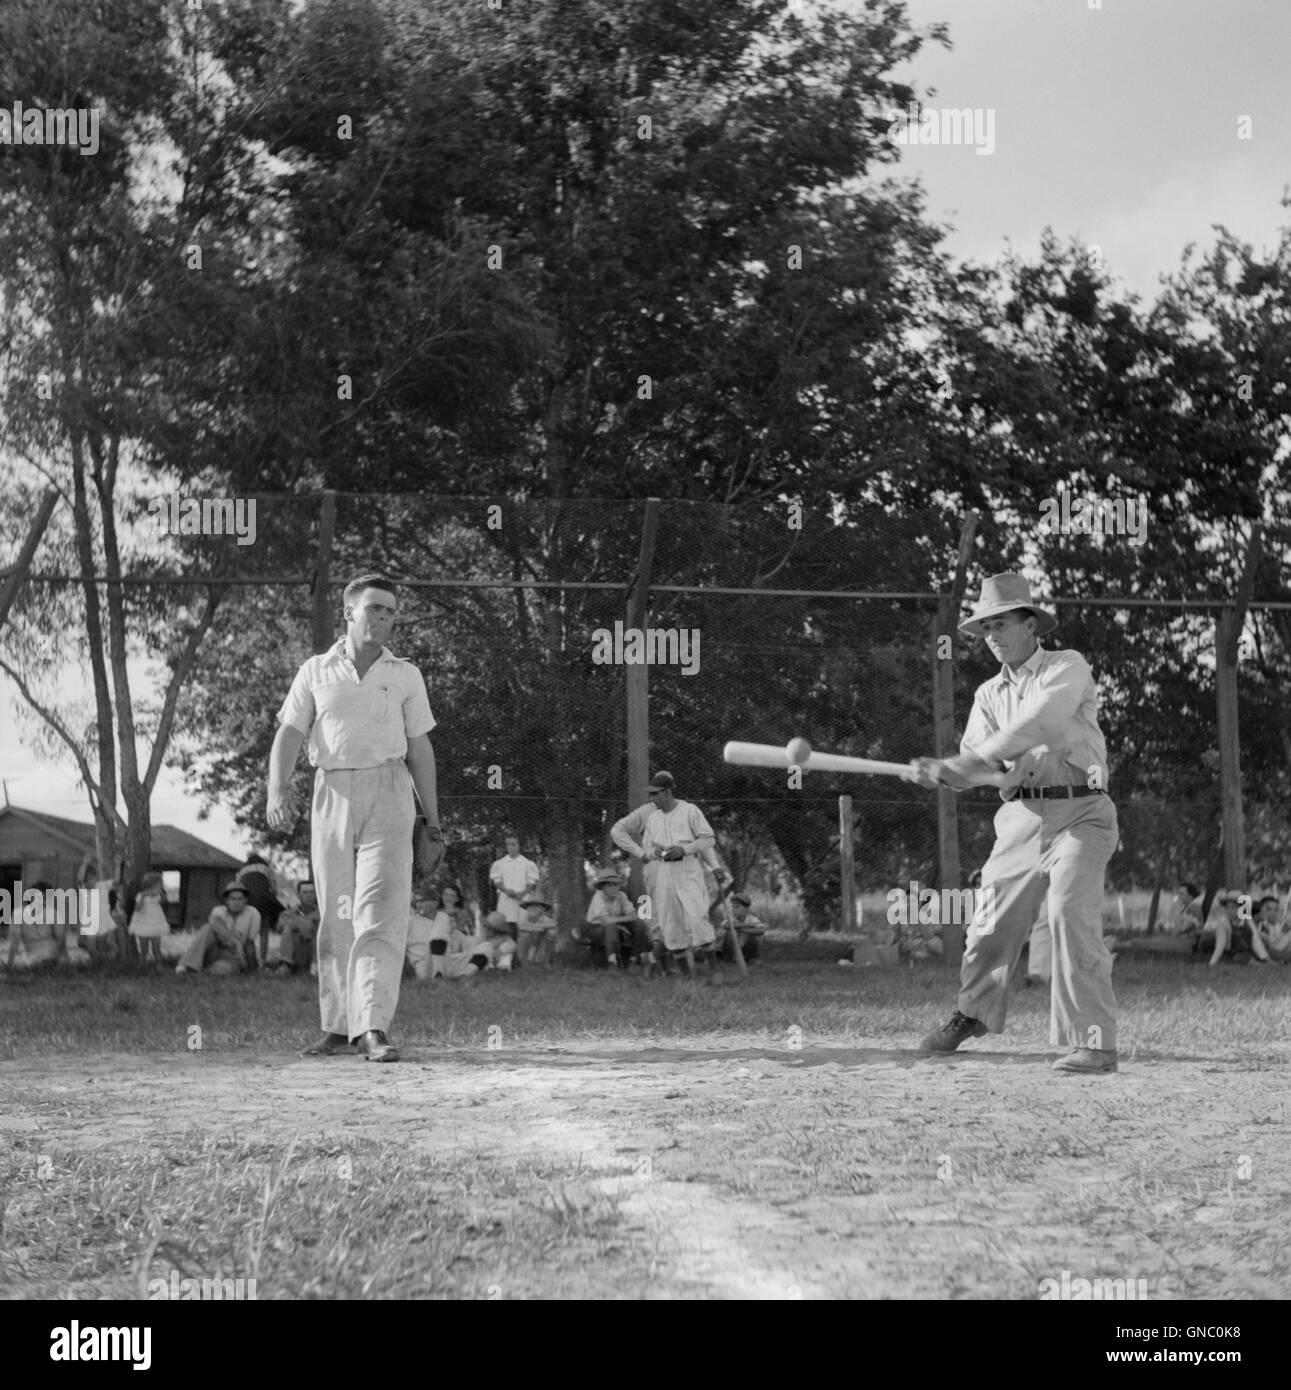 Men Playing Baseball on Saturday Afternoon, Schriever, Terrebonne Parish, Louisiana, USA, Marion Post Wolcott for Farm Security Administration, June 1940 Stock Photo